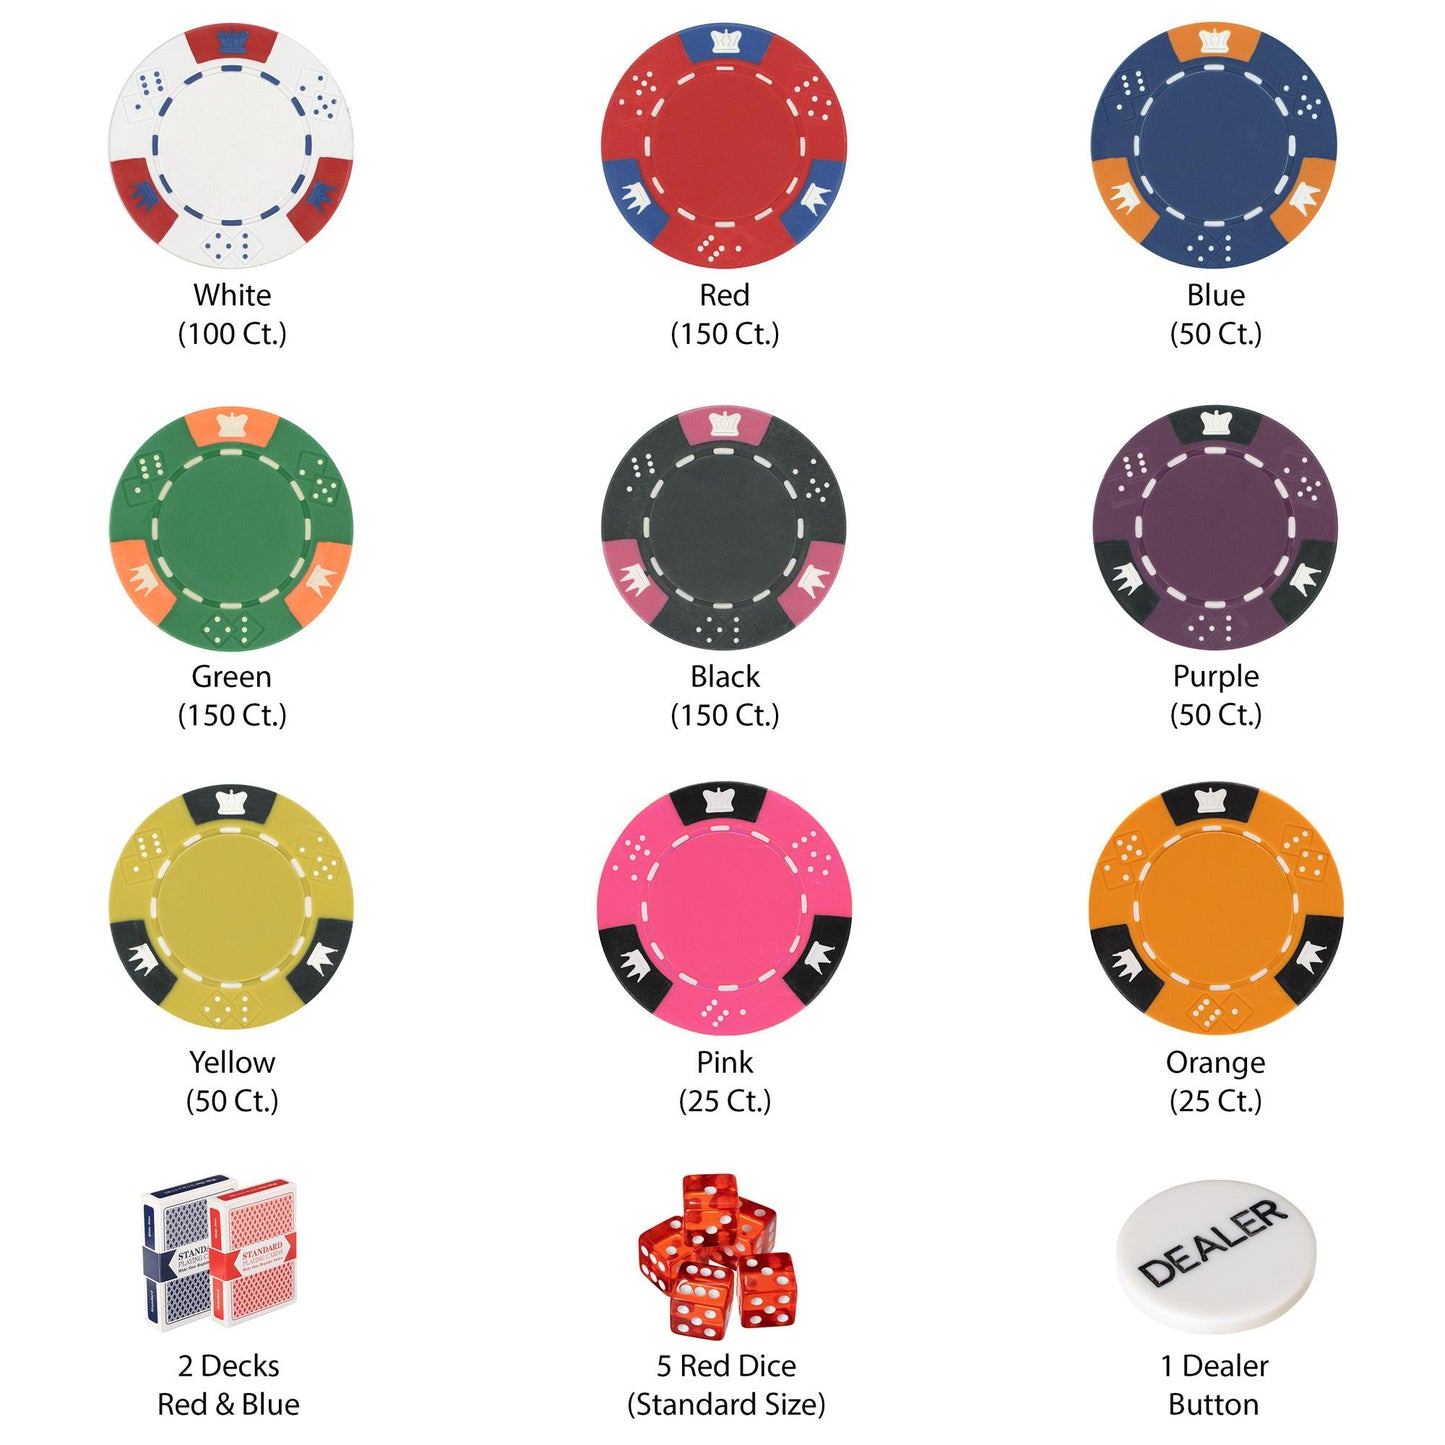 750 Crown and Dice Poker Chips with Aluminum Case